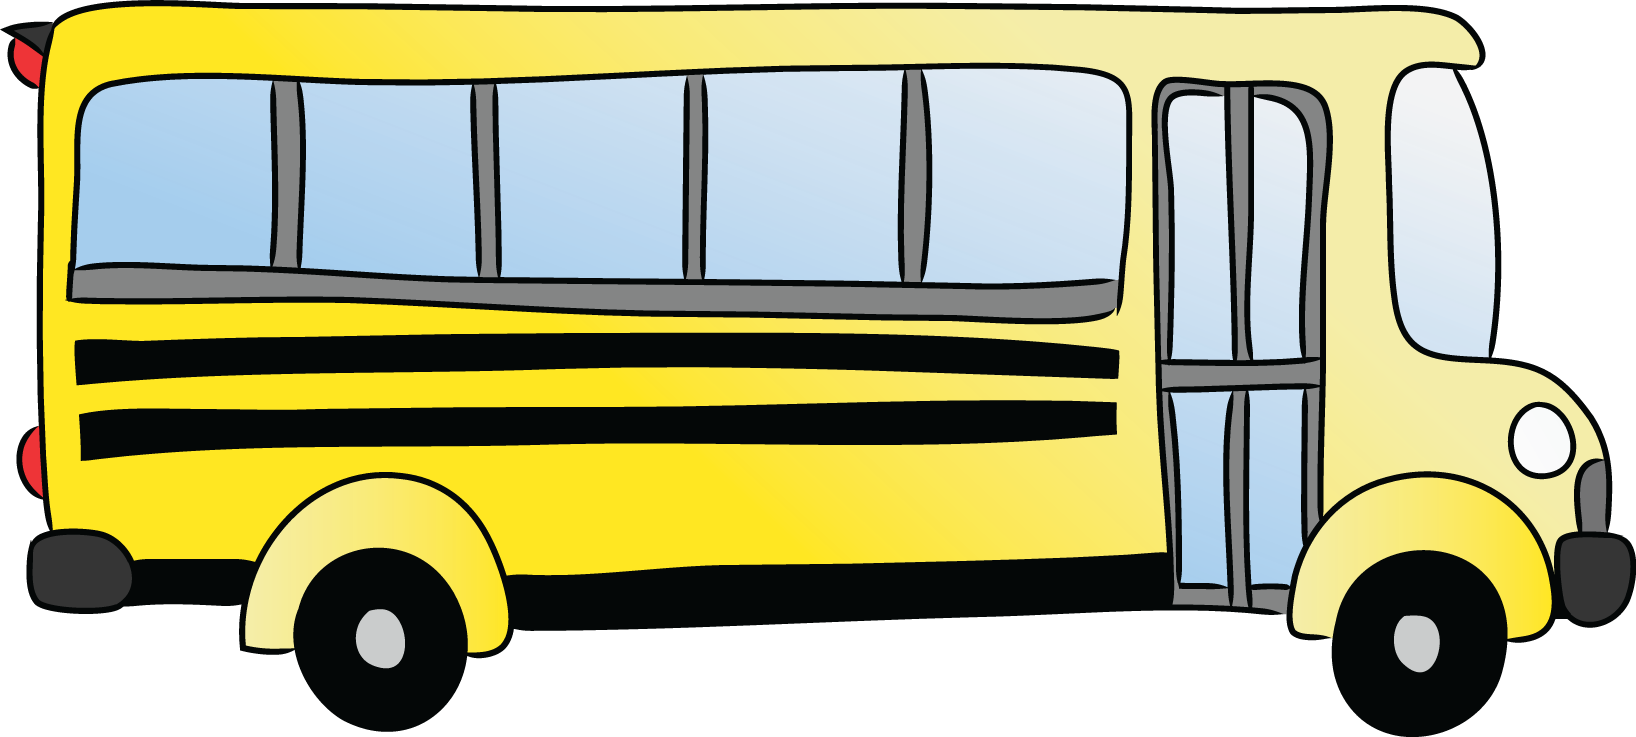 free clipart of a school bus - photo #20